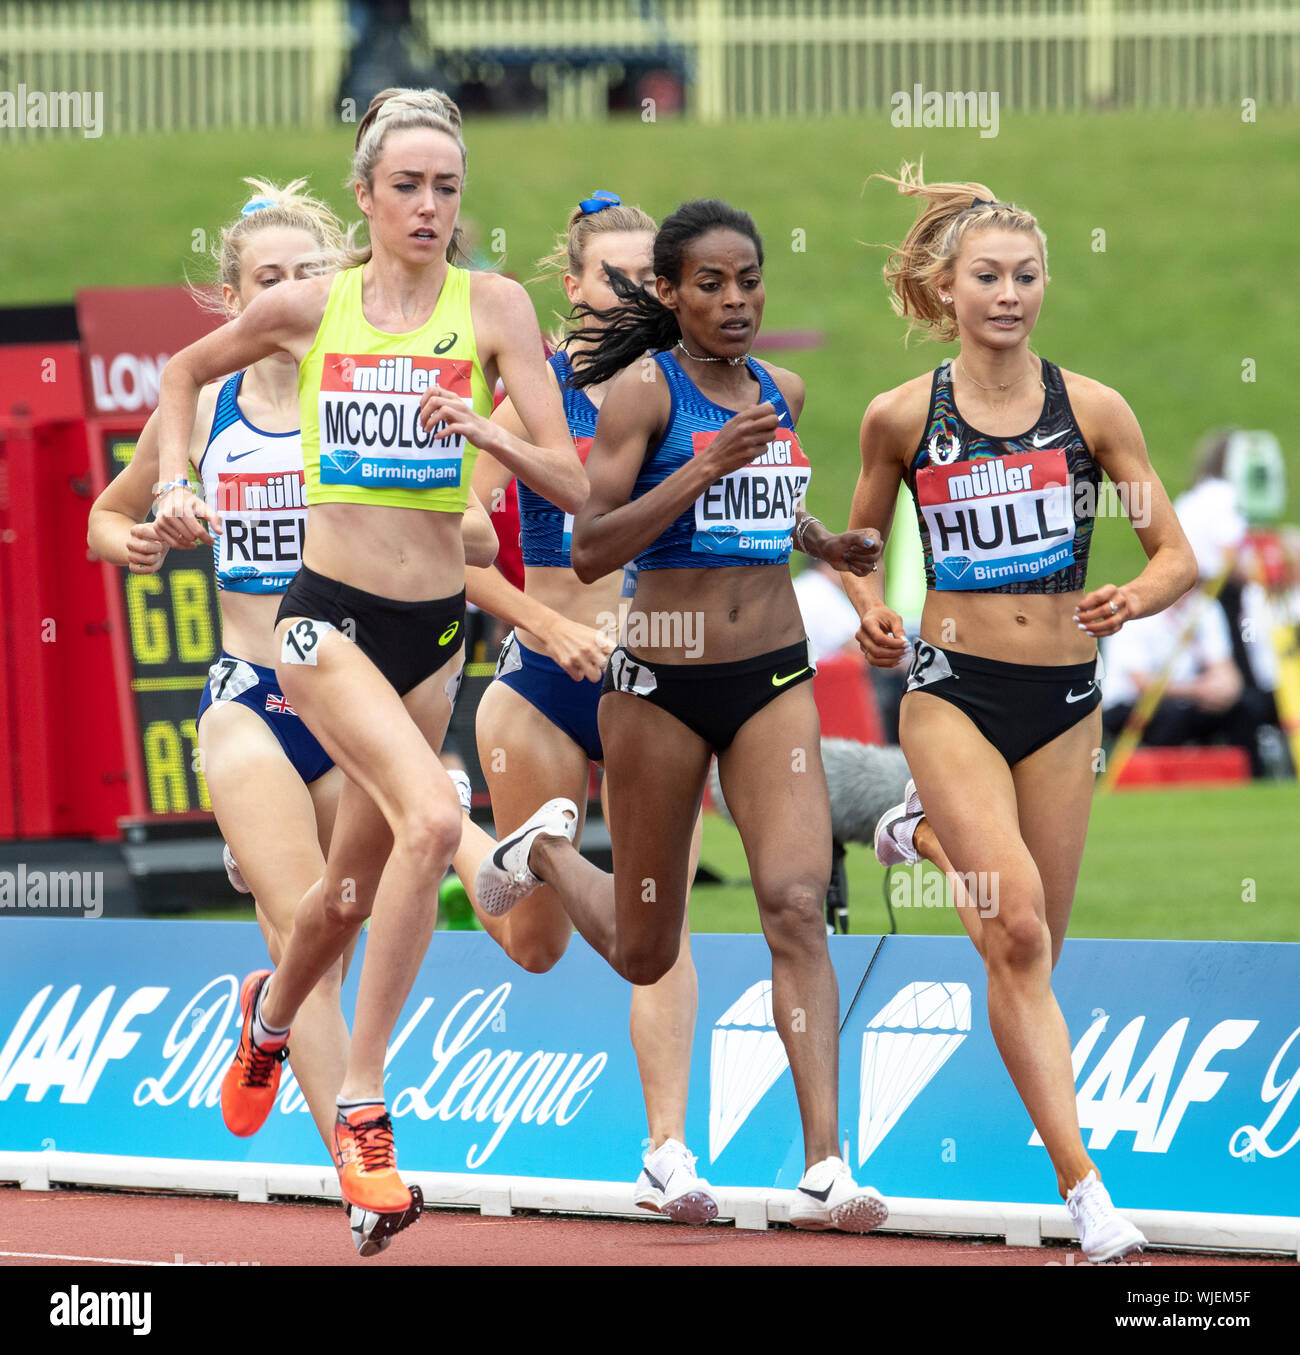 BIRMINGHAM, ENGLAND - AUGUST 18:  Eilish McColgan (GBR) Axumawit Embaye (ETH) Jessica Hull (AUS) competing in the 1 Mile race during the Muller Birmin Stock Photo